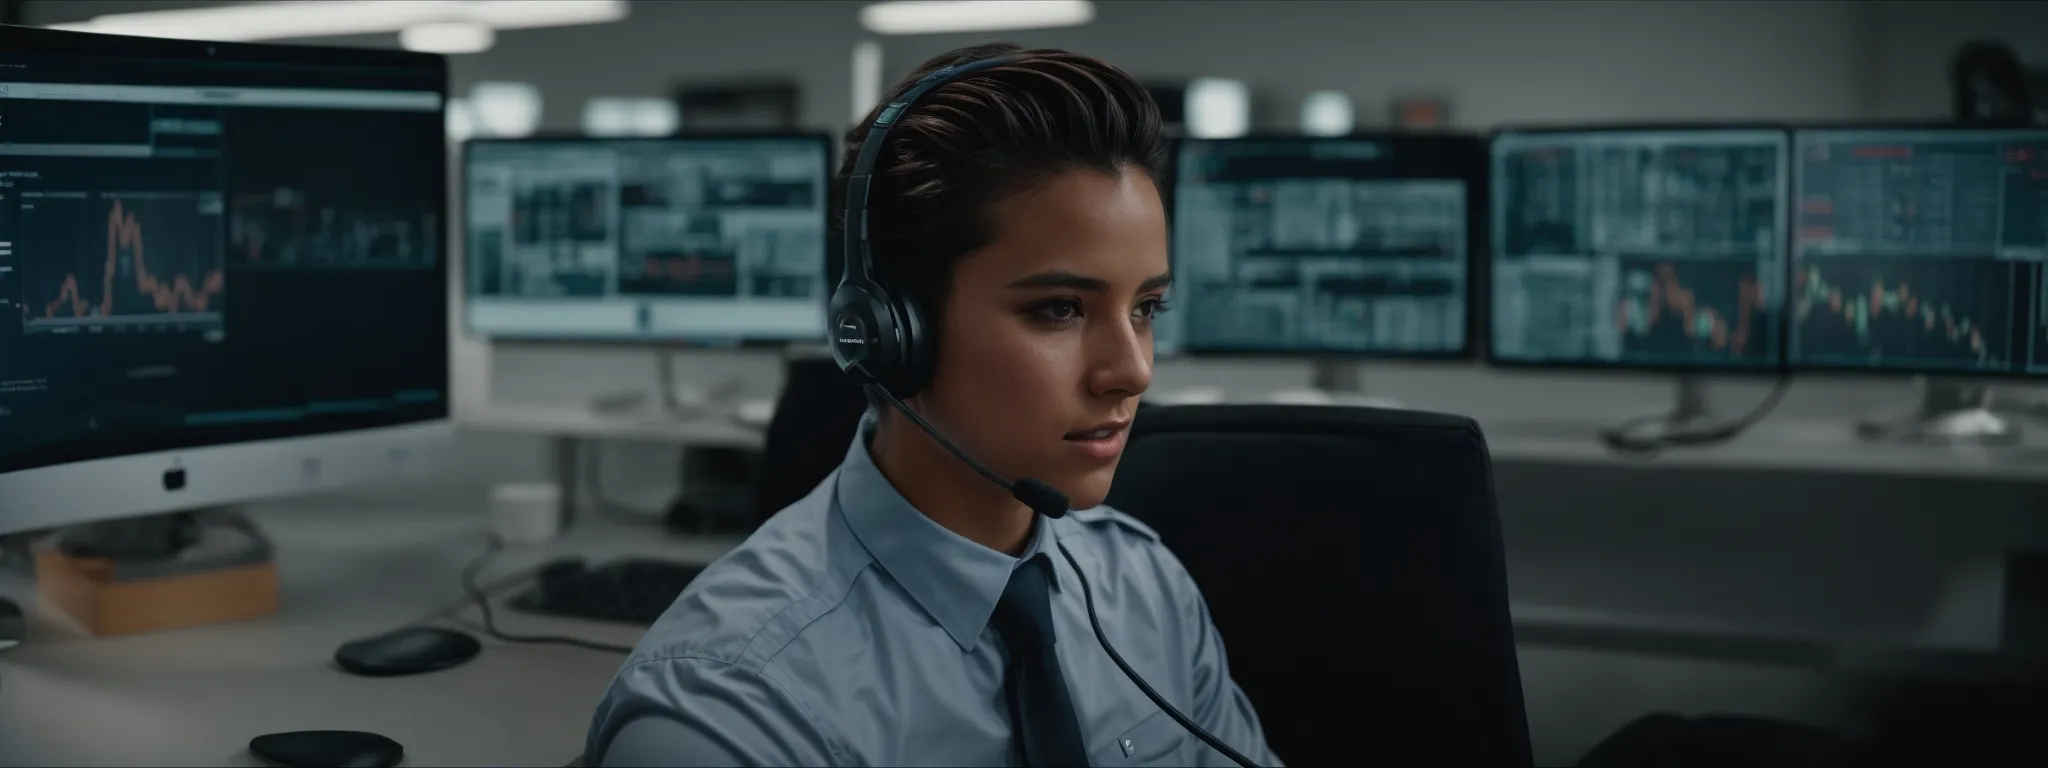 a customer service representative wearing a headset while interacting with a sleek and modern interface on a computer screen.